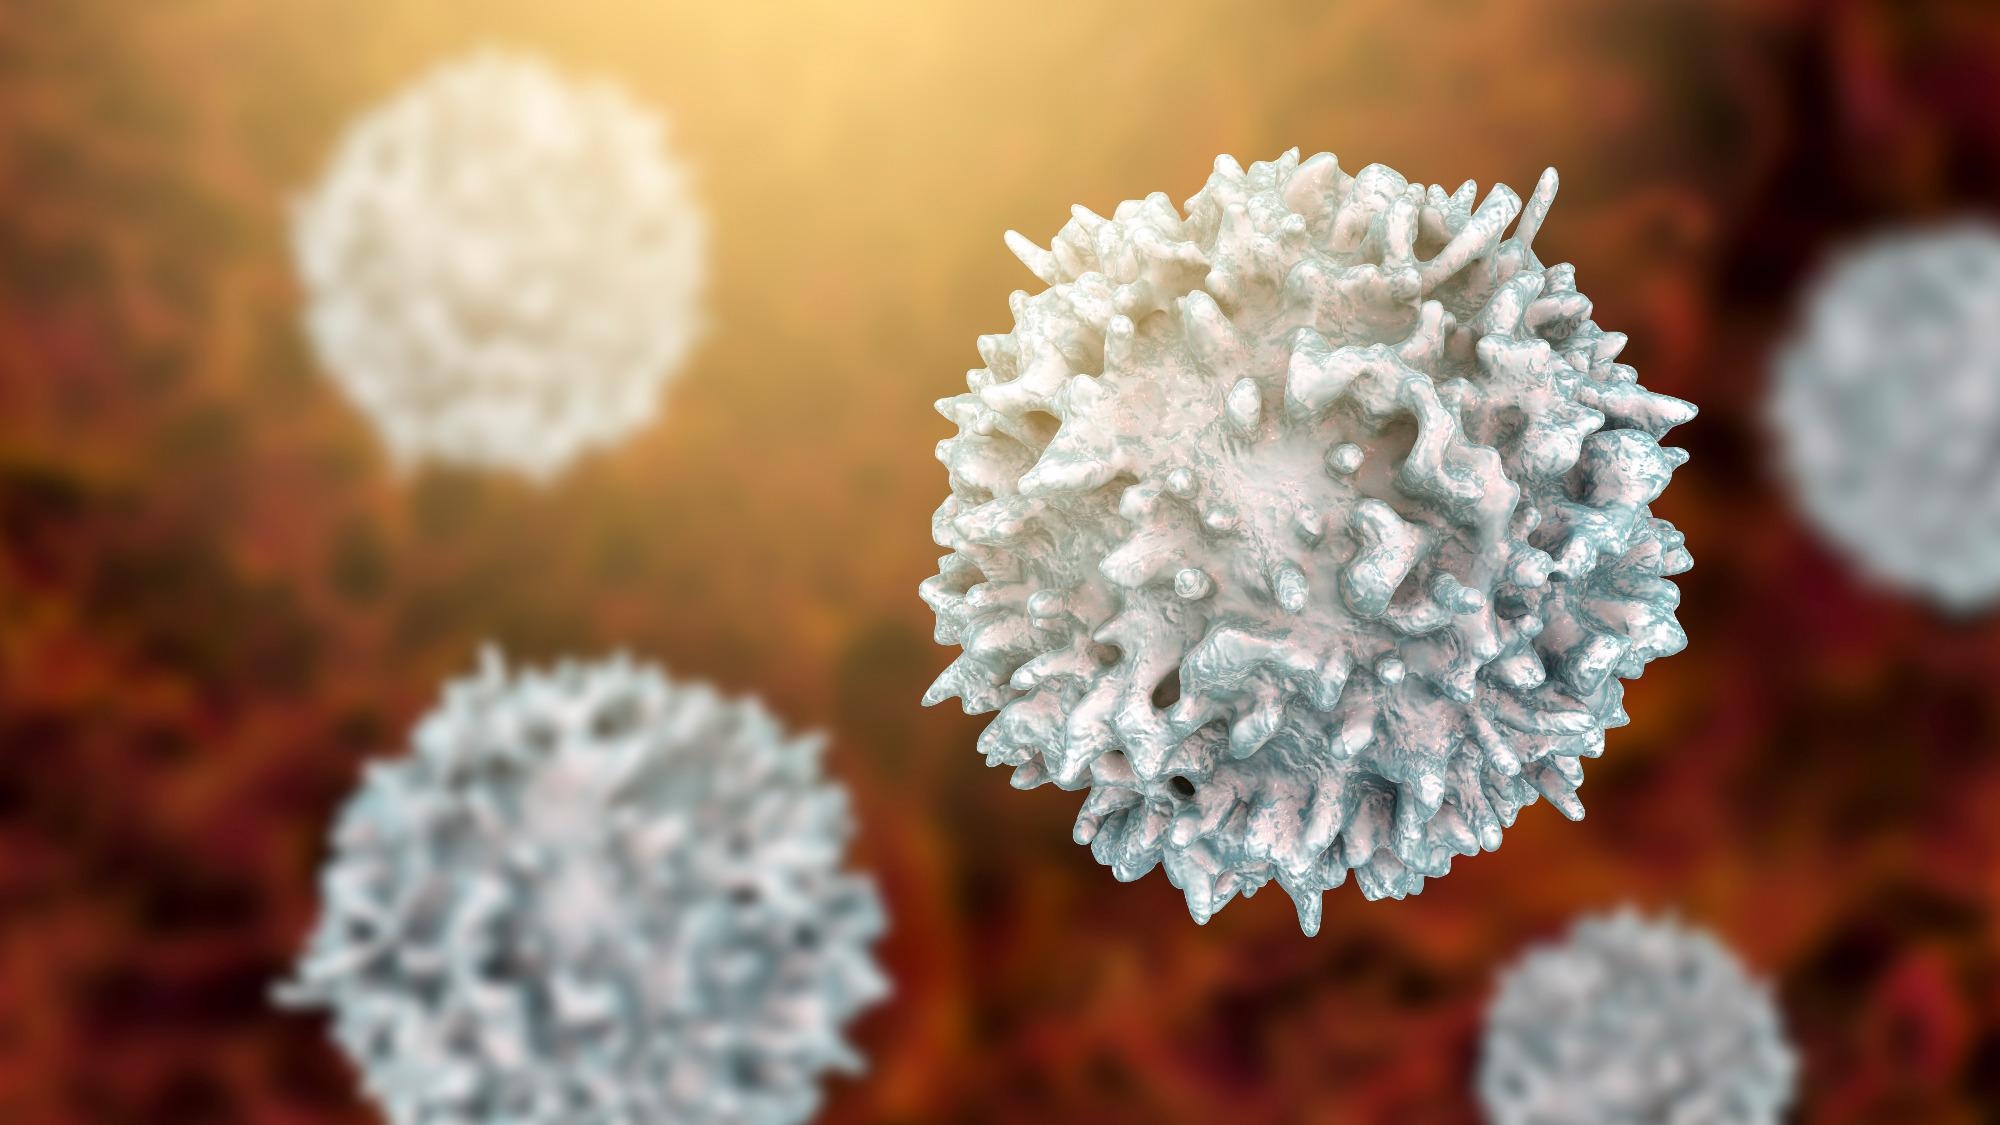 Study: Phase I/II trial of a peptide-based COVID-19 T-cell activator in patients with B-cell deficiency. Image Credit: Kateryna Kon / Shutterstock